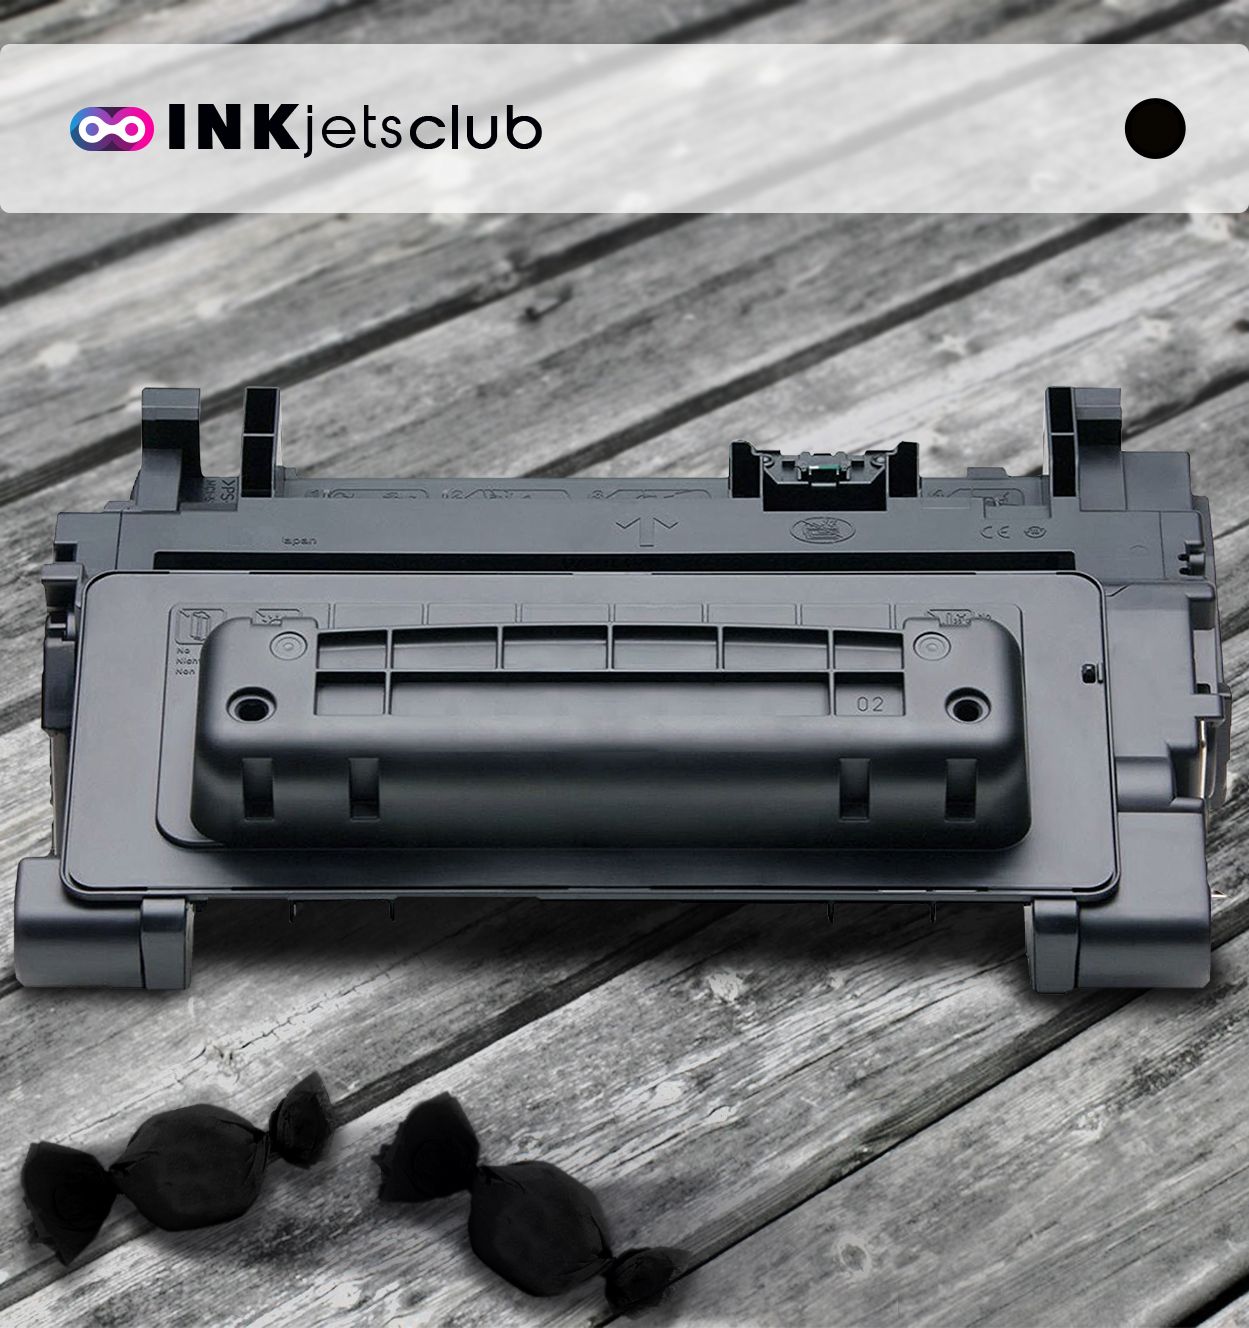 moronic hø Trickle HP 64A (CC364A) Black Toner Cartridge. Best Company To Deal With!